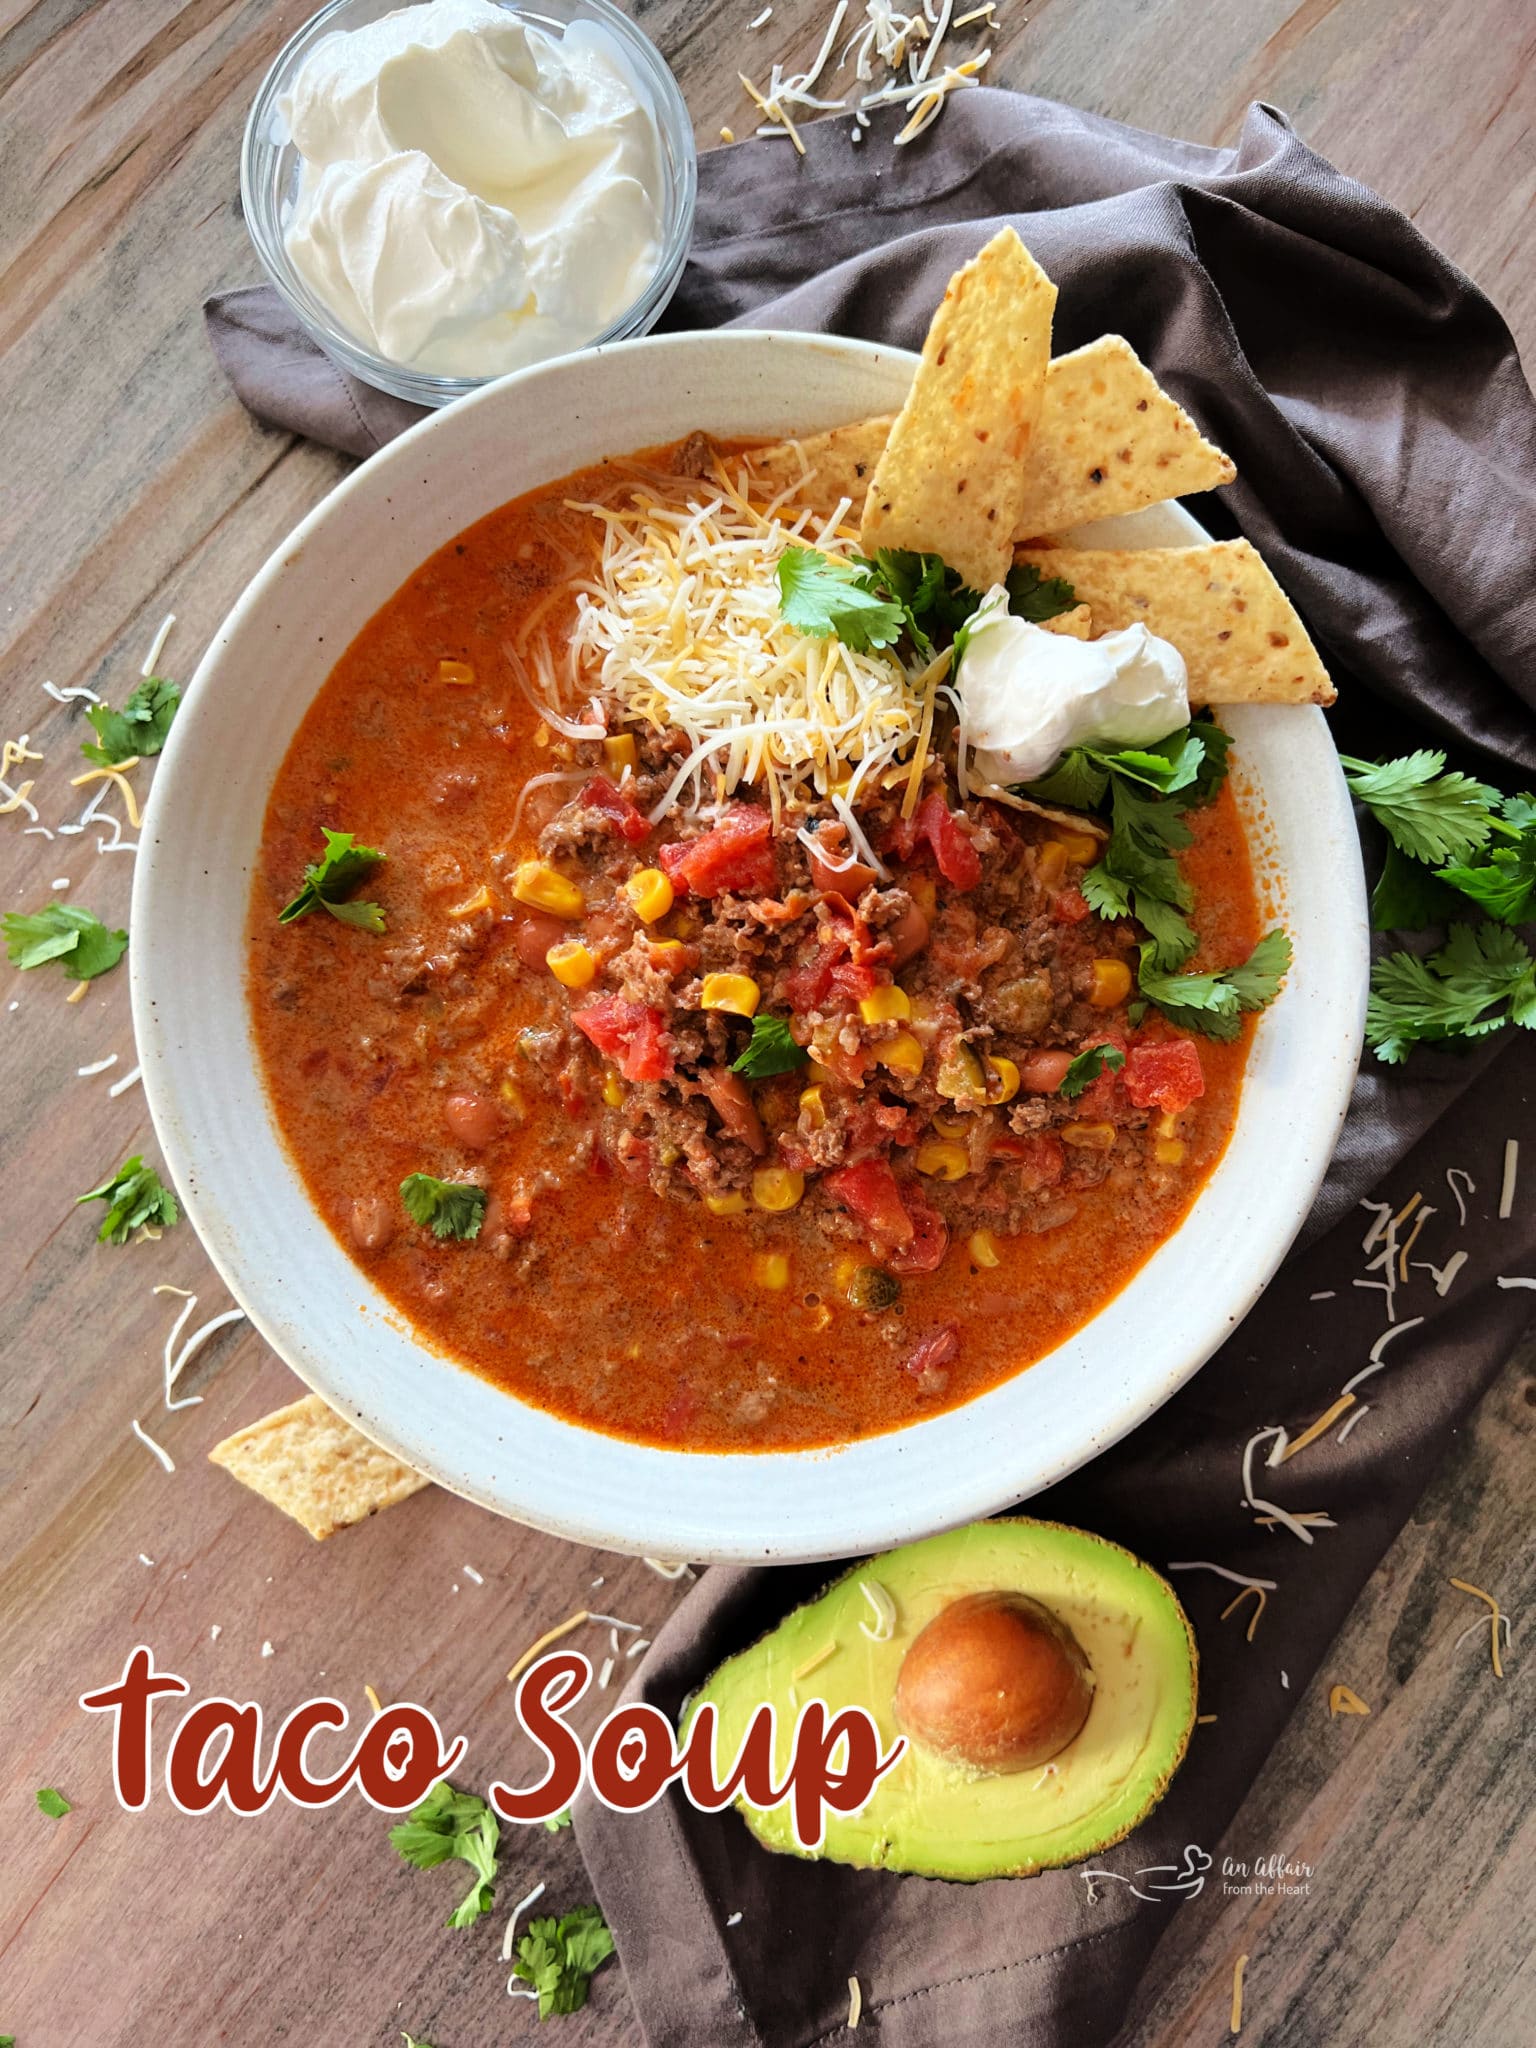 Hearty Taco Soup Recipe - Stovetop or Slow Cooker Friendly